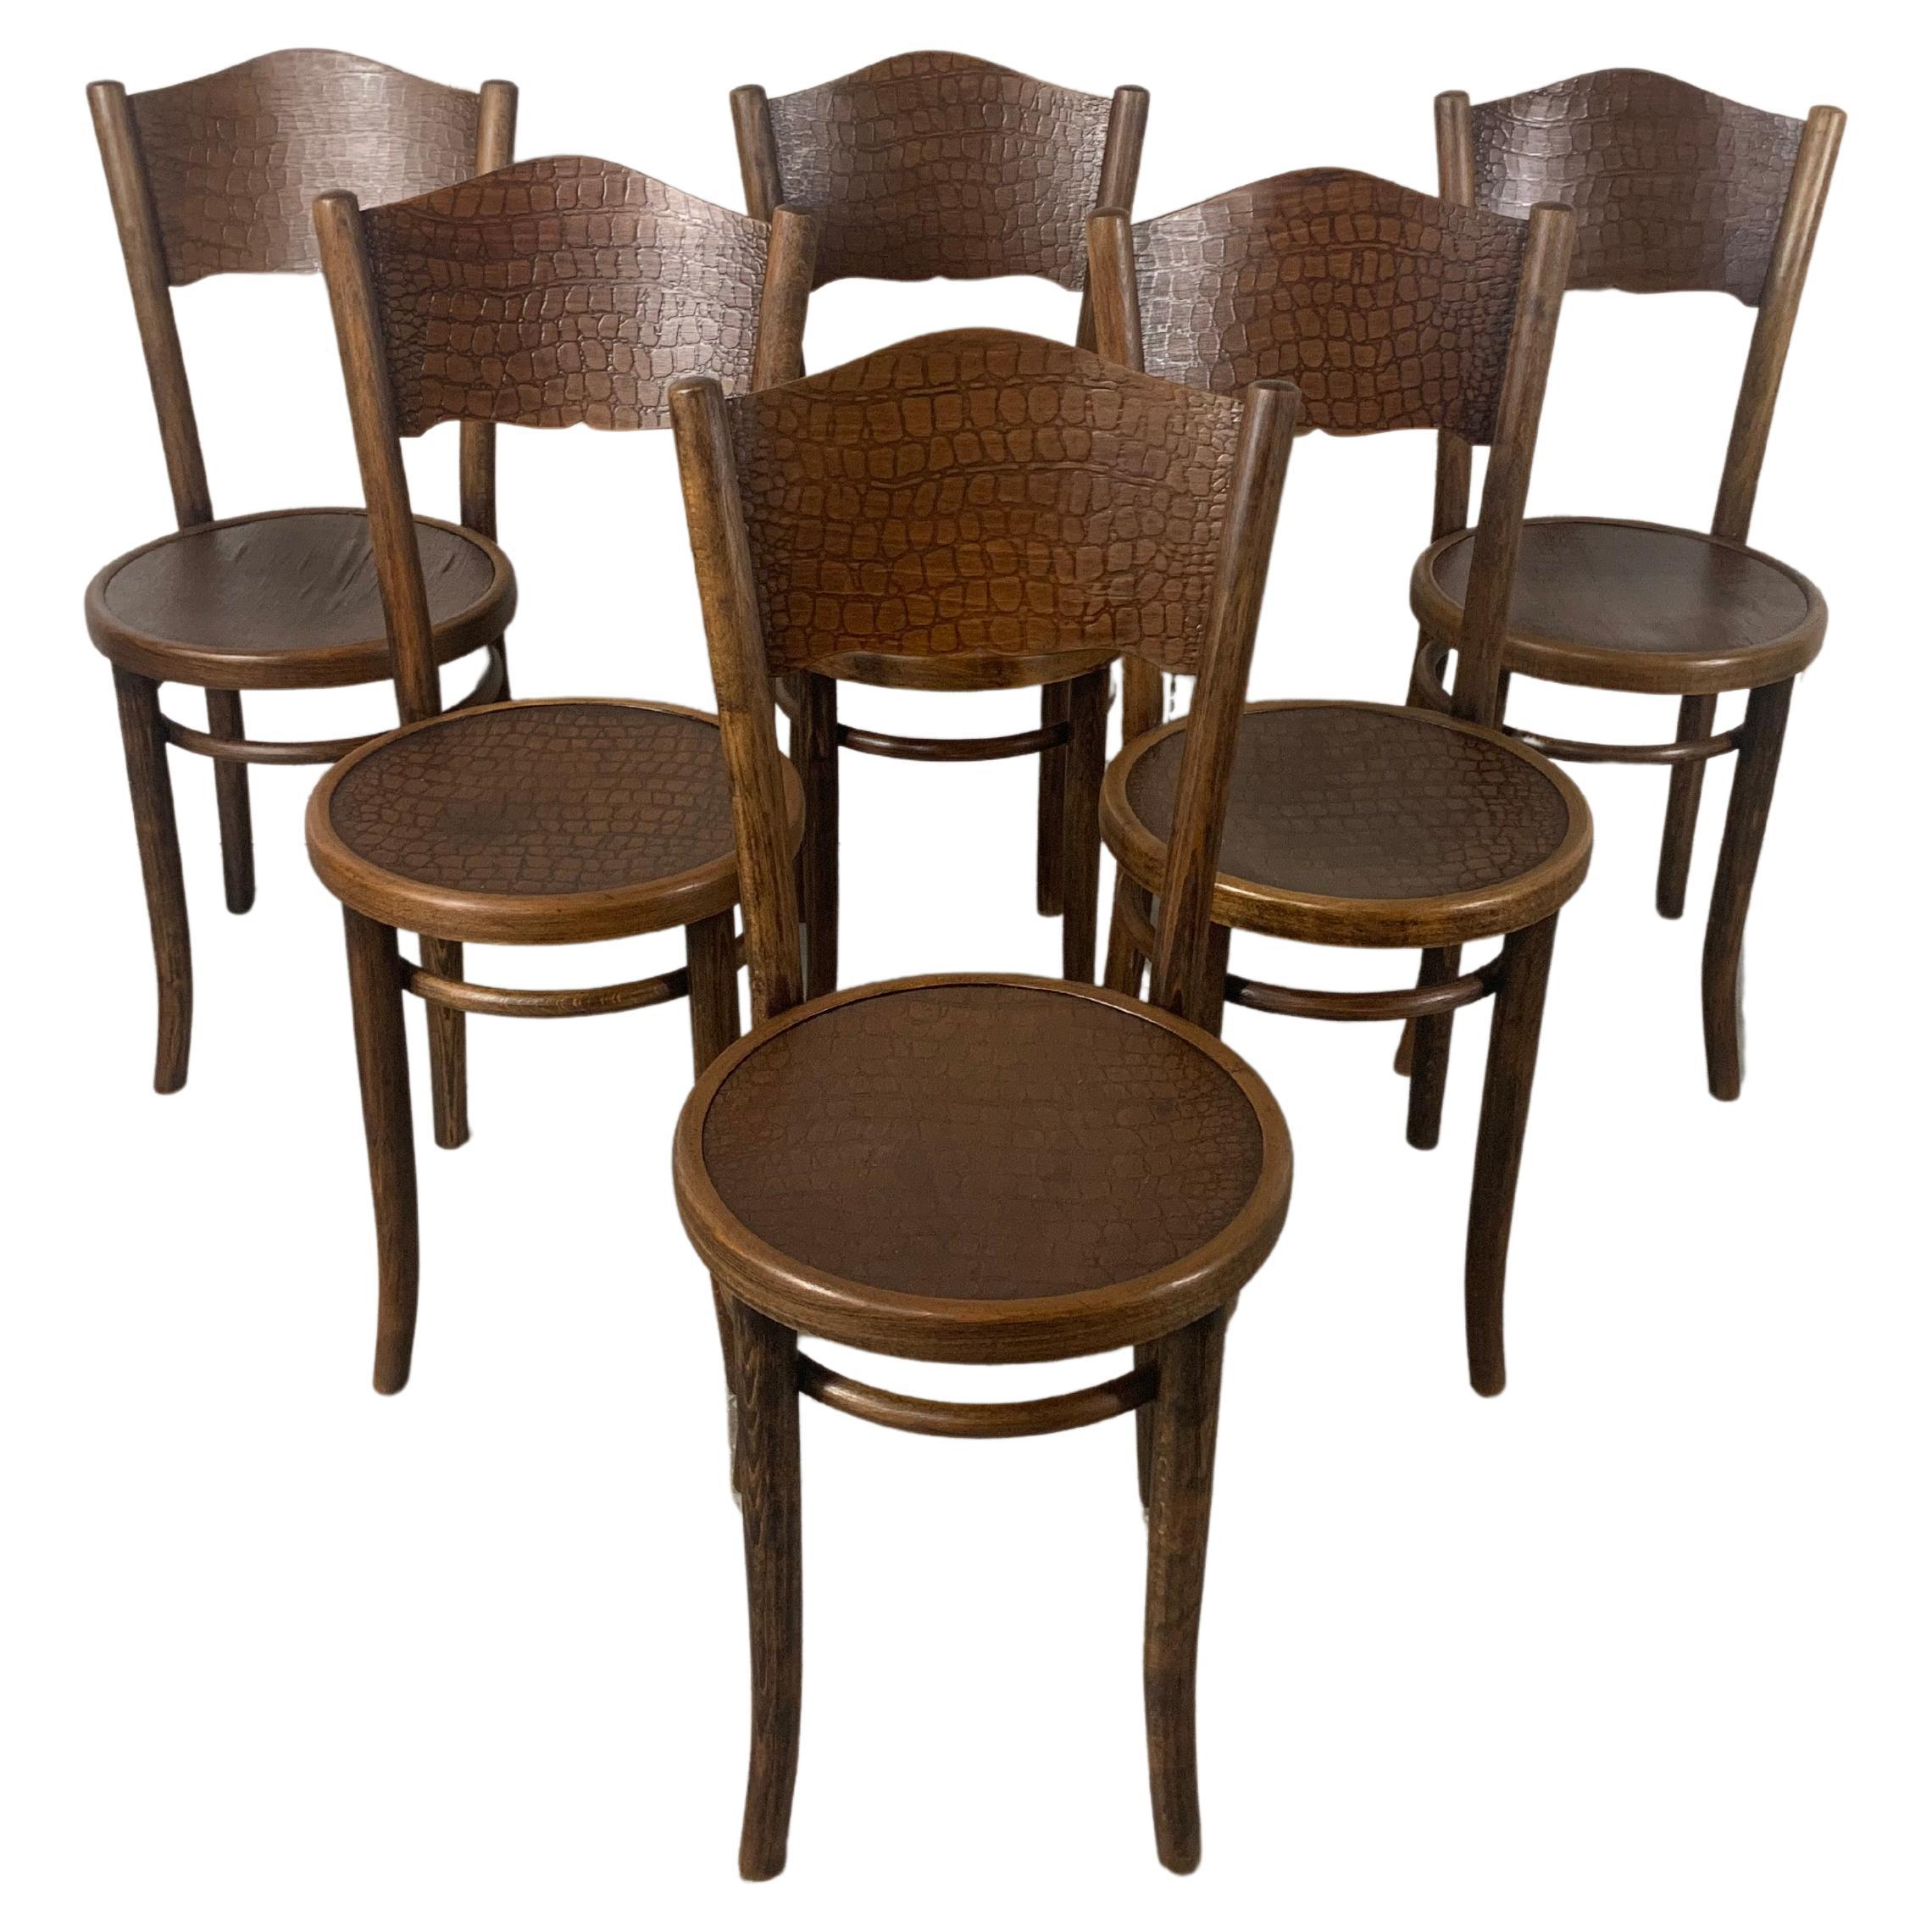 Model 255 Thonet Bentwood Chairs "Crocodile" pattern set of 6 For Sale